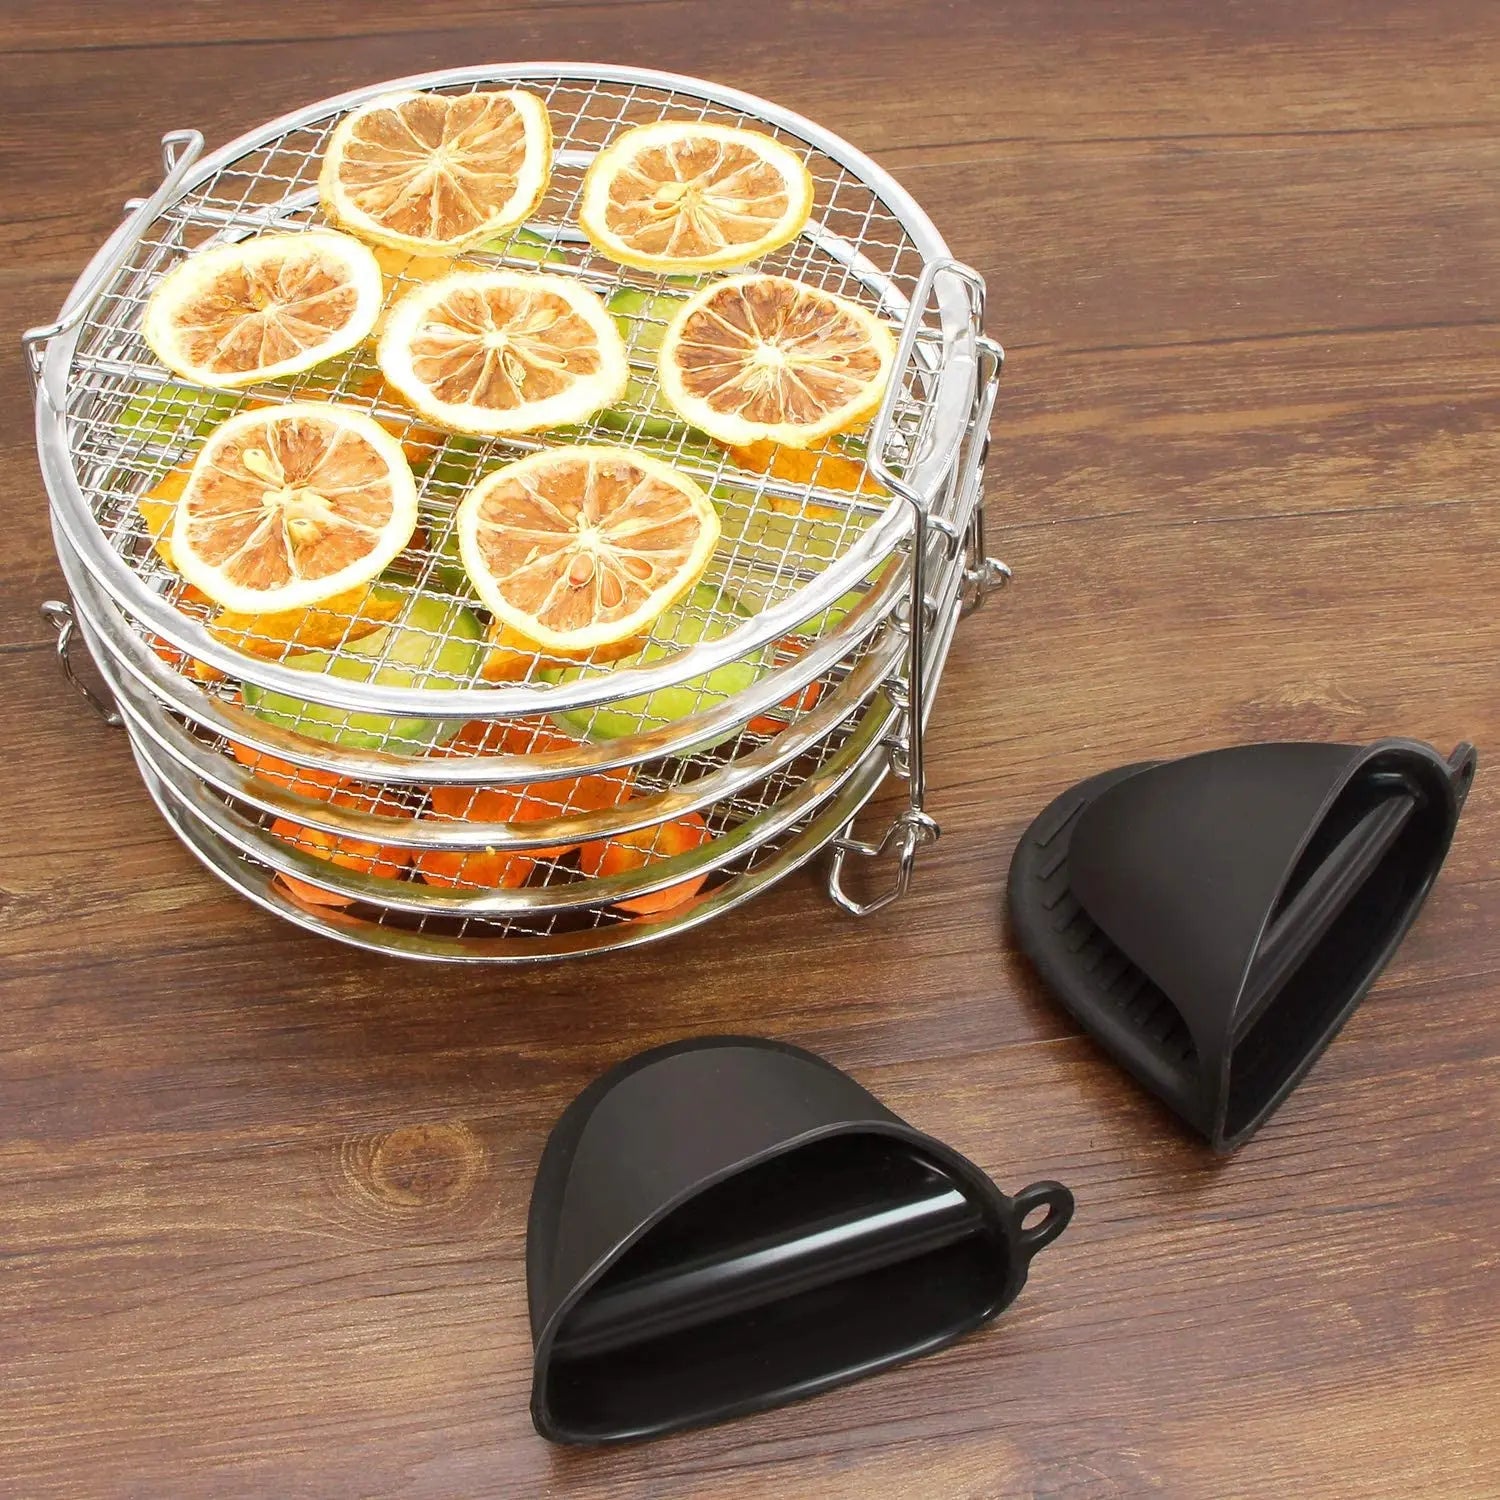 Airfryer fryer accessories 5 layers of grill suitable for Ninja Foodi dewater dried fruit rack.